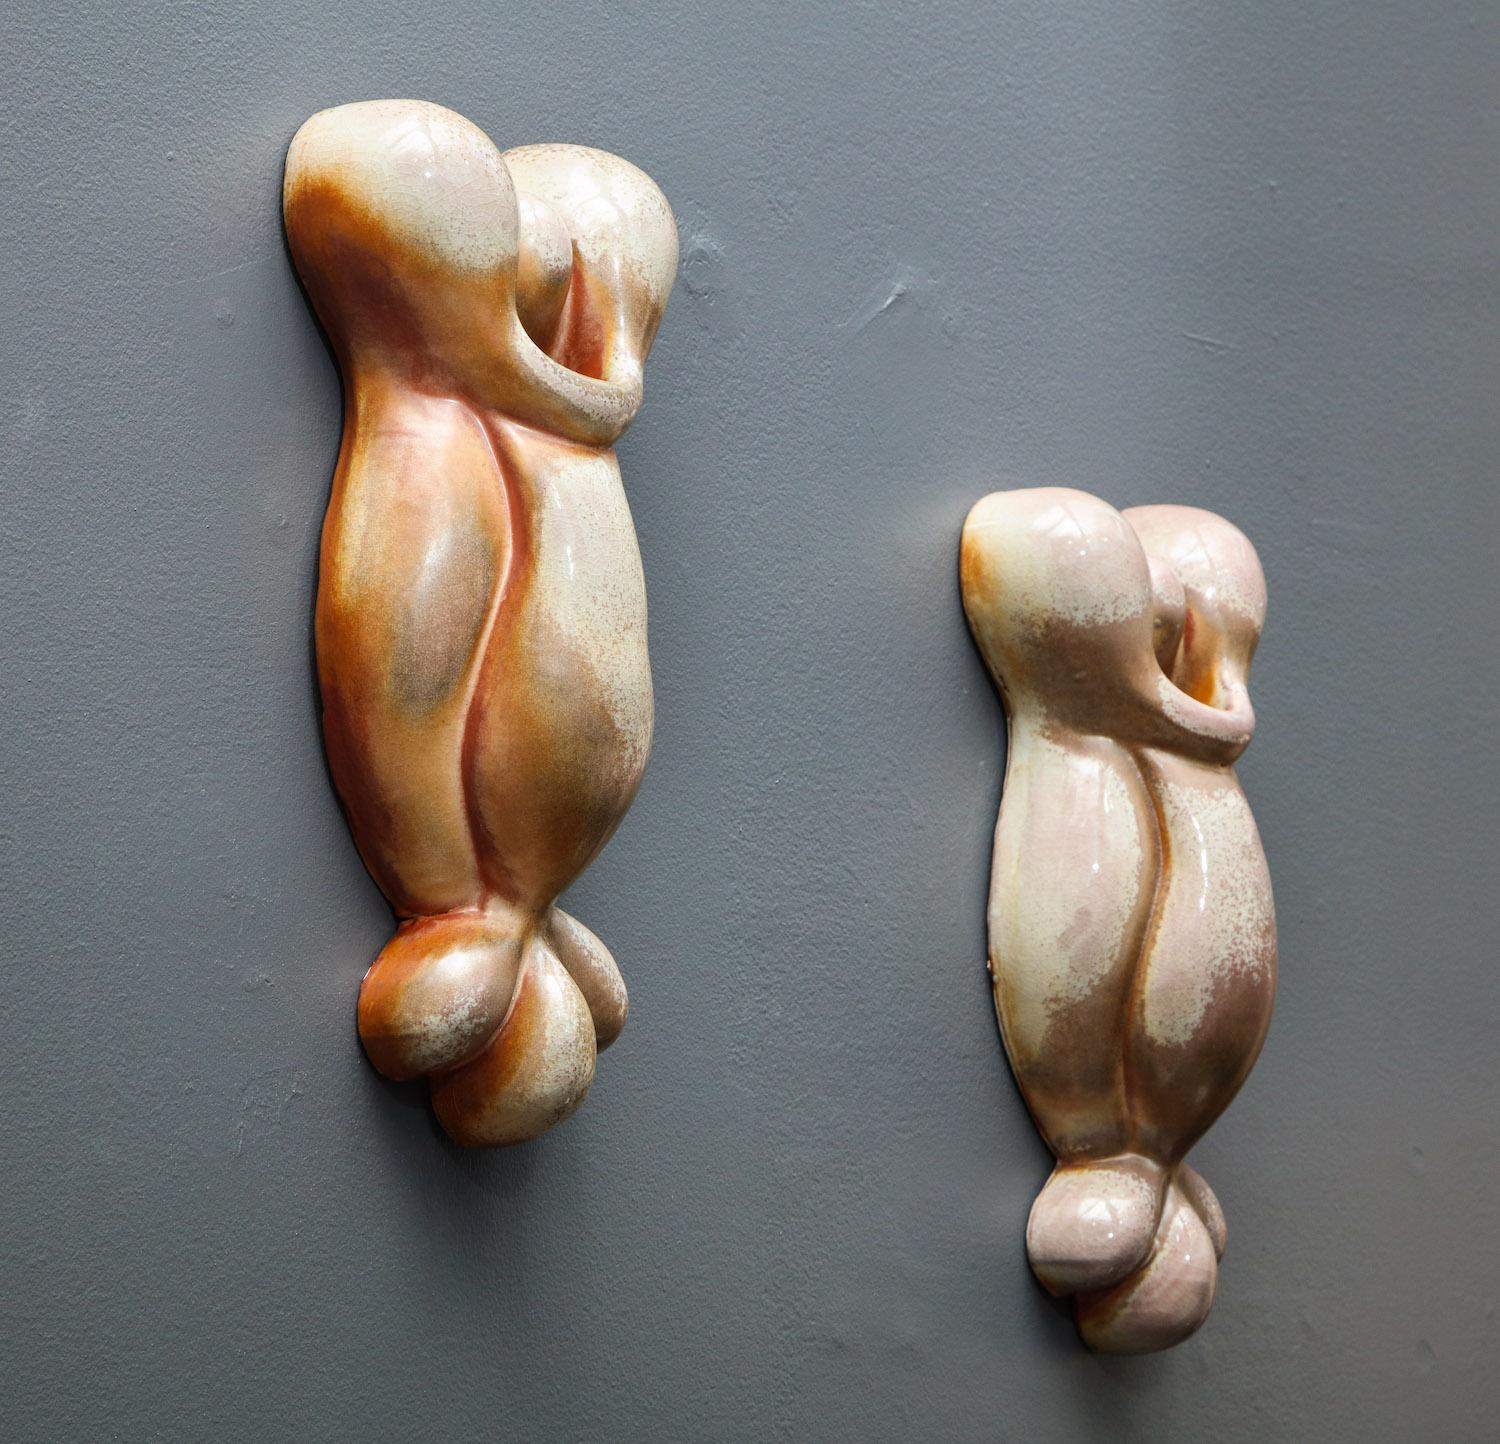 Pair of cast porcelain wall-mounted sculptures in warm and cool colored glaze. Wood fired. Artist-signed and dated on backside.